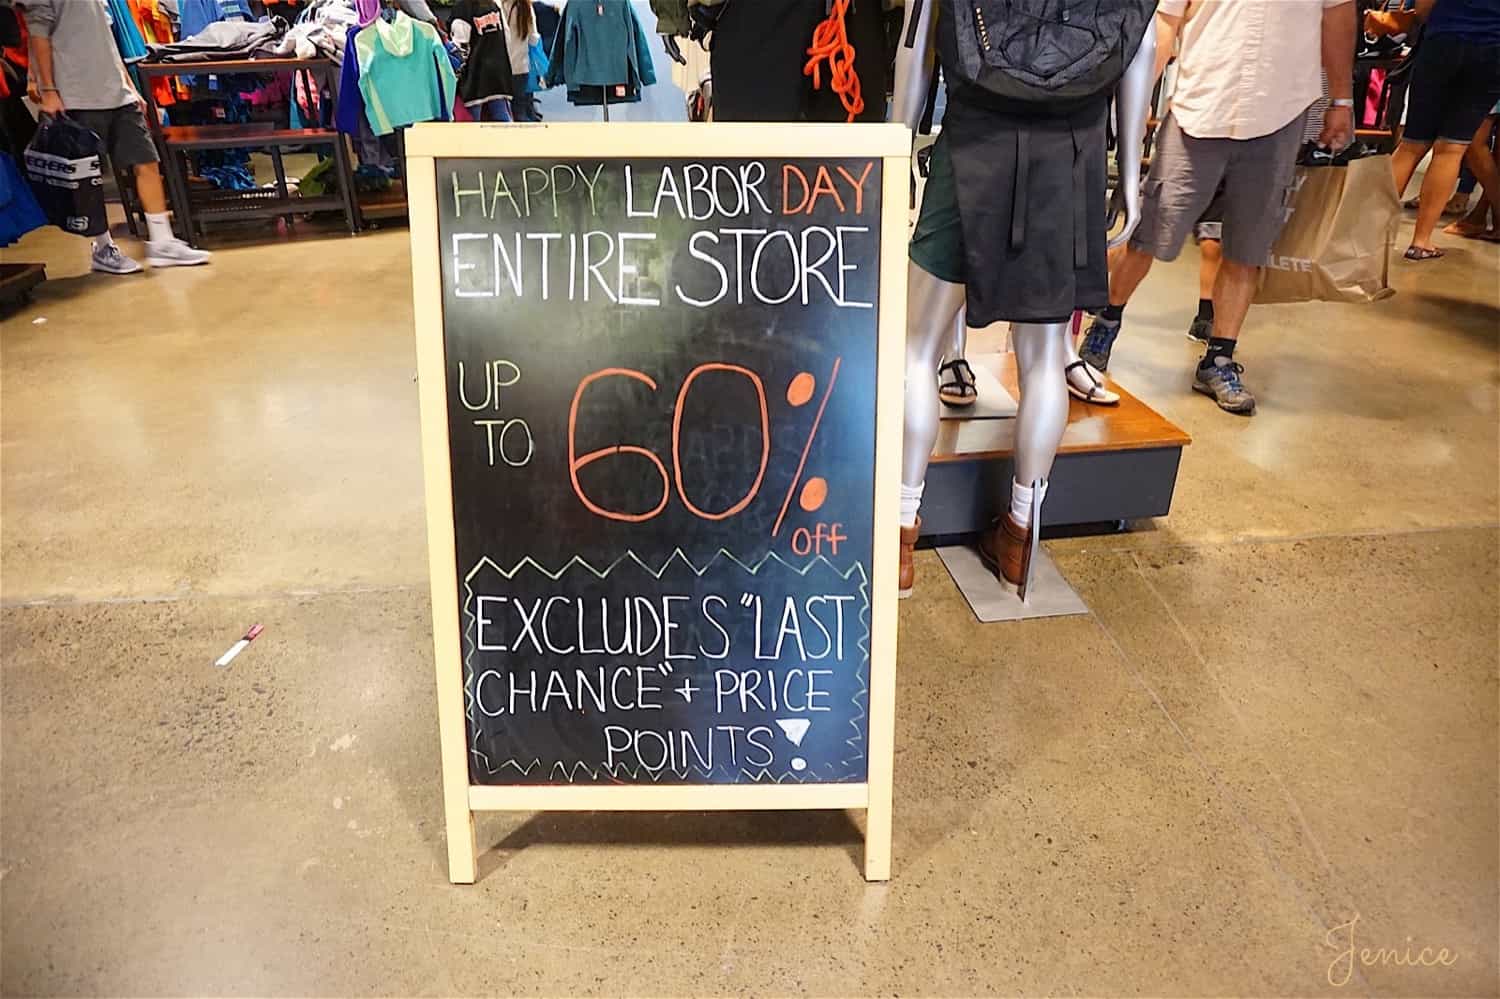 nike outlet labor day sale